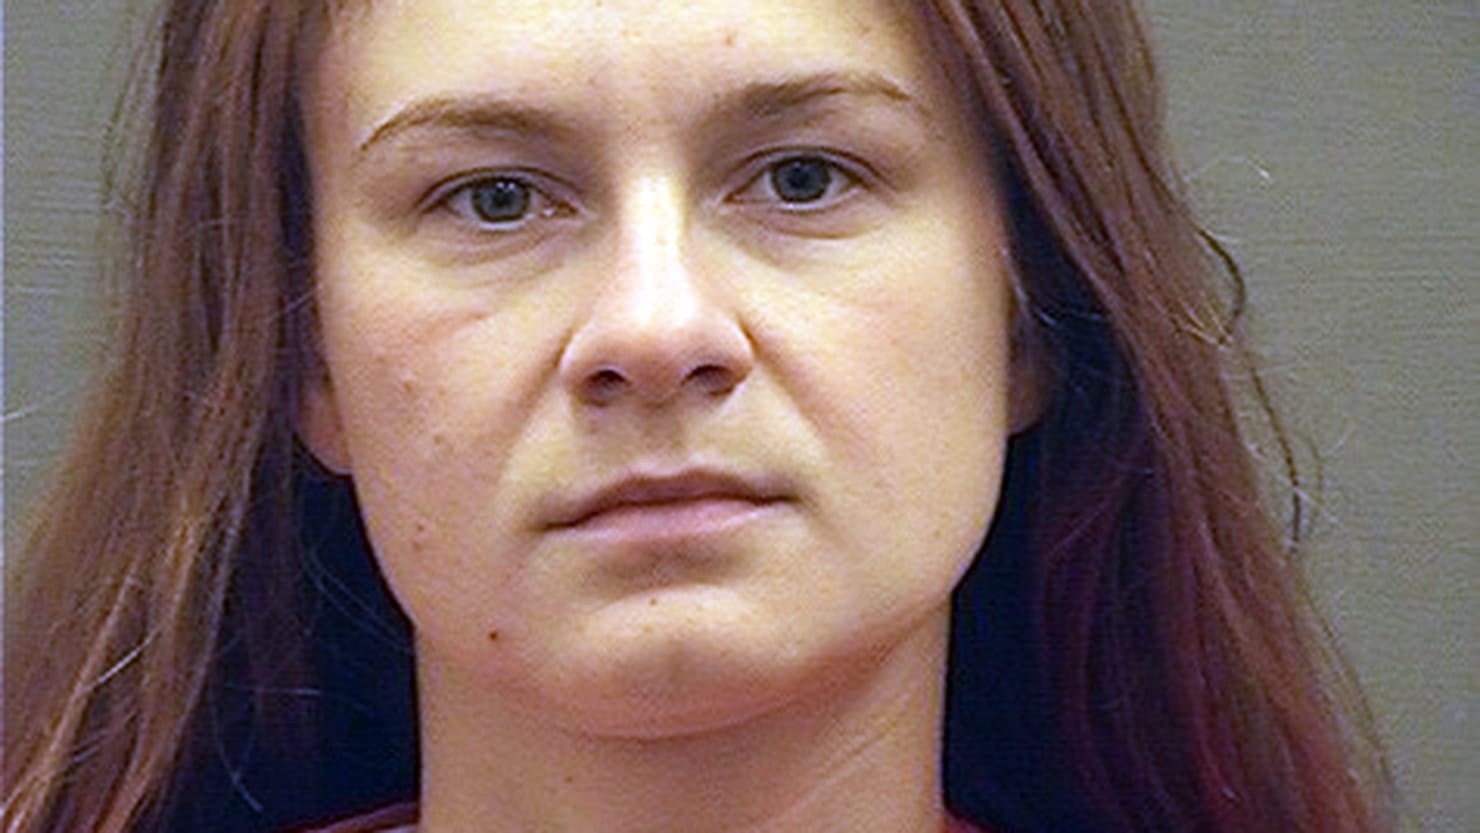 Alleged Russian Agent Marina Butina Moved to Virginia Jail, Unclear Why